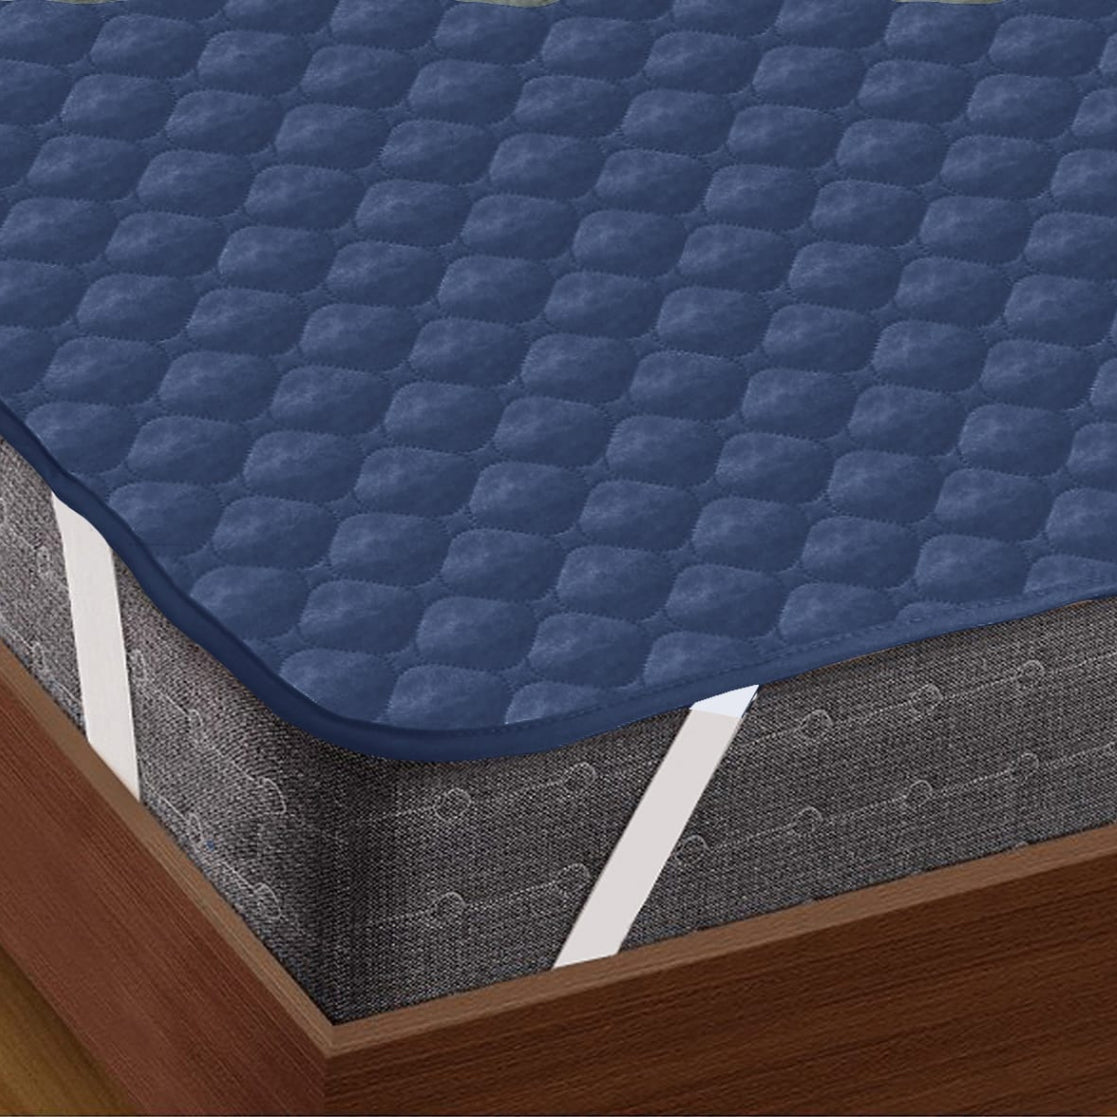 AURAVE Elasticated Quilted Waterproof Mattress Protector (Blue)